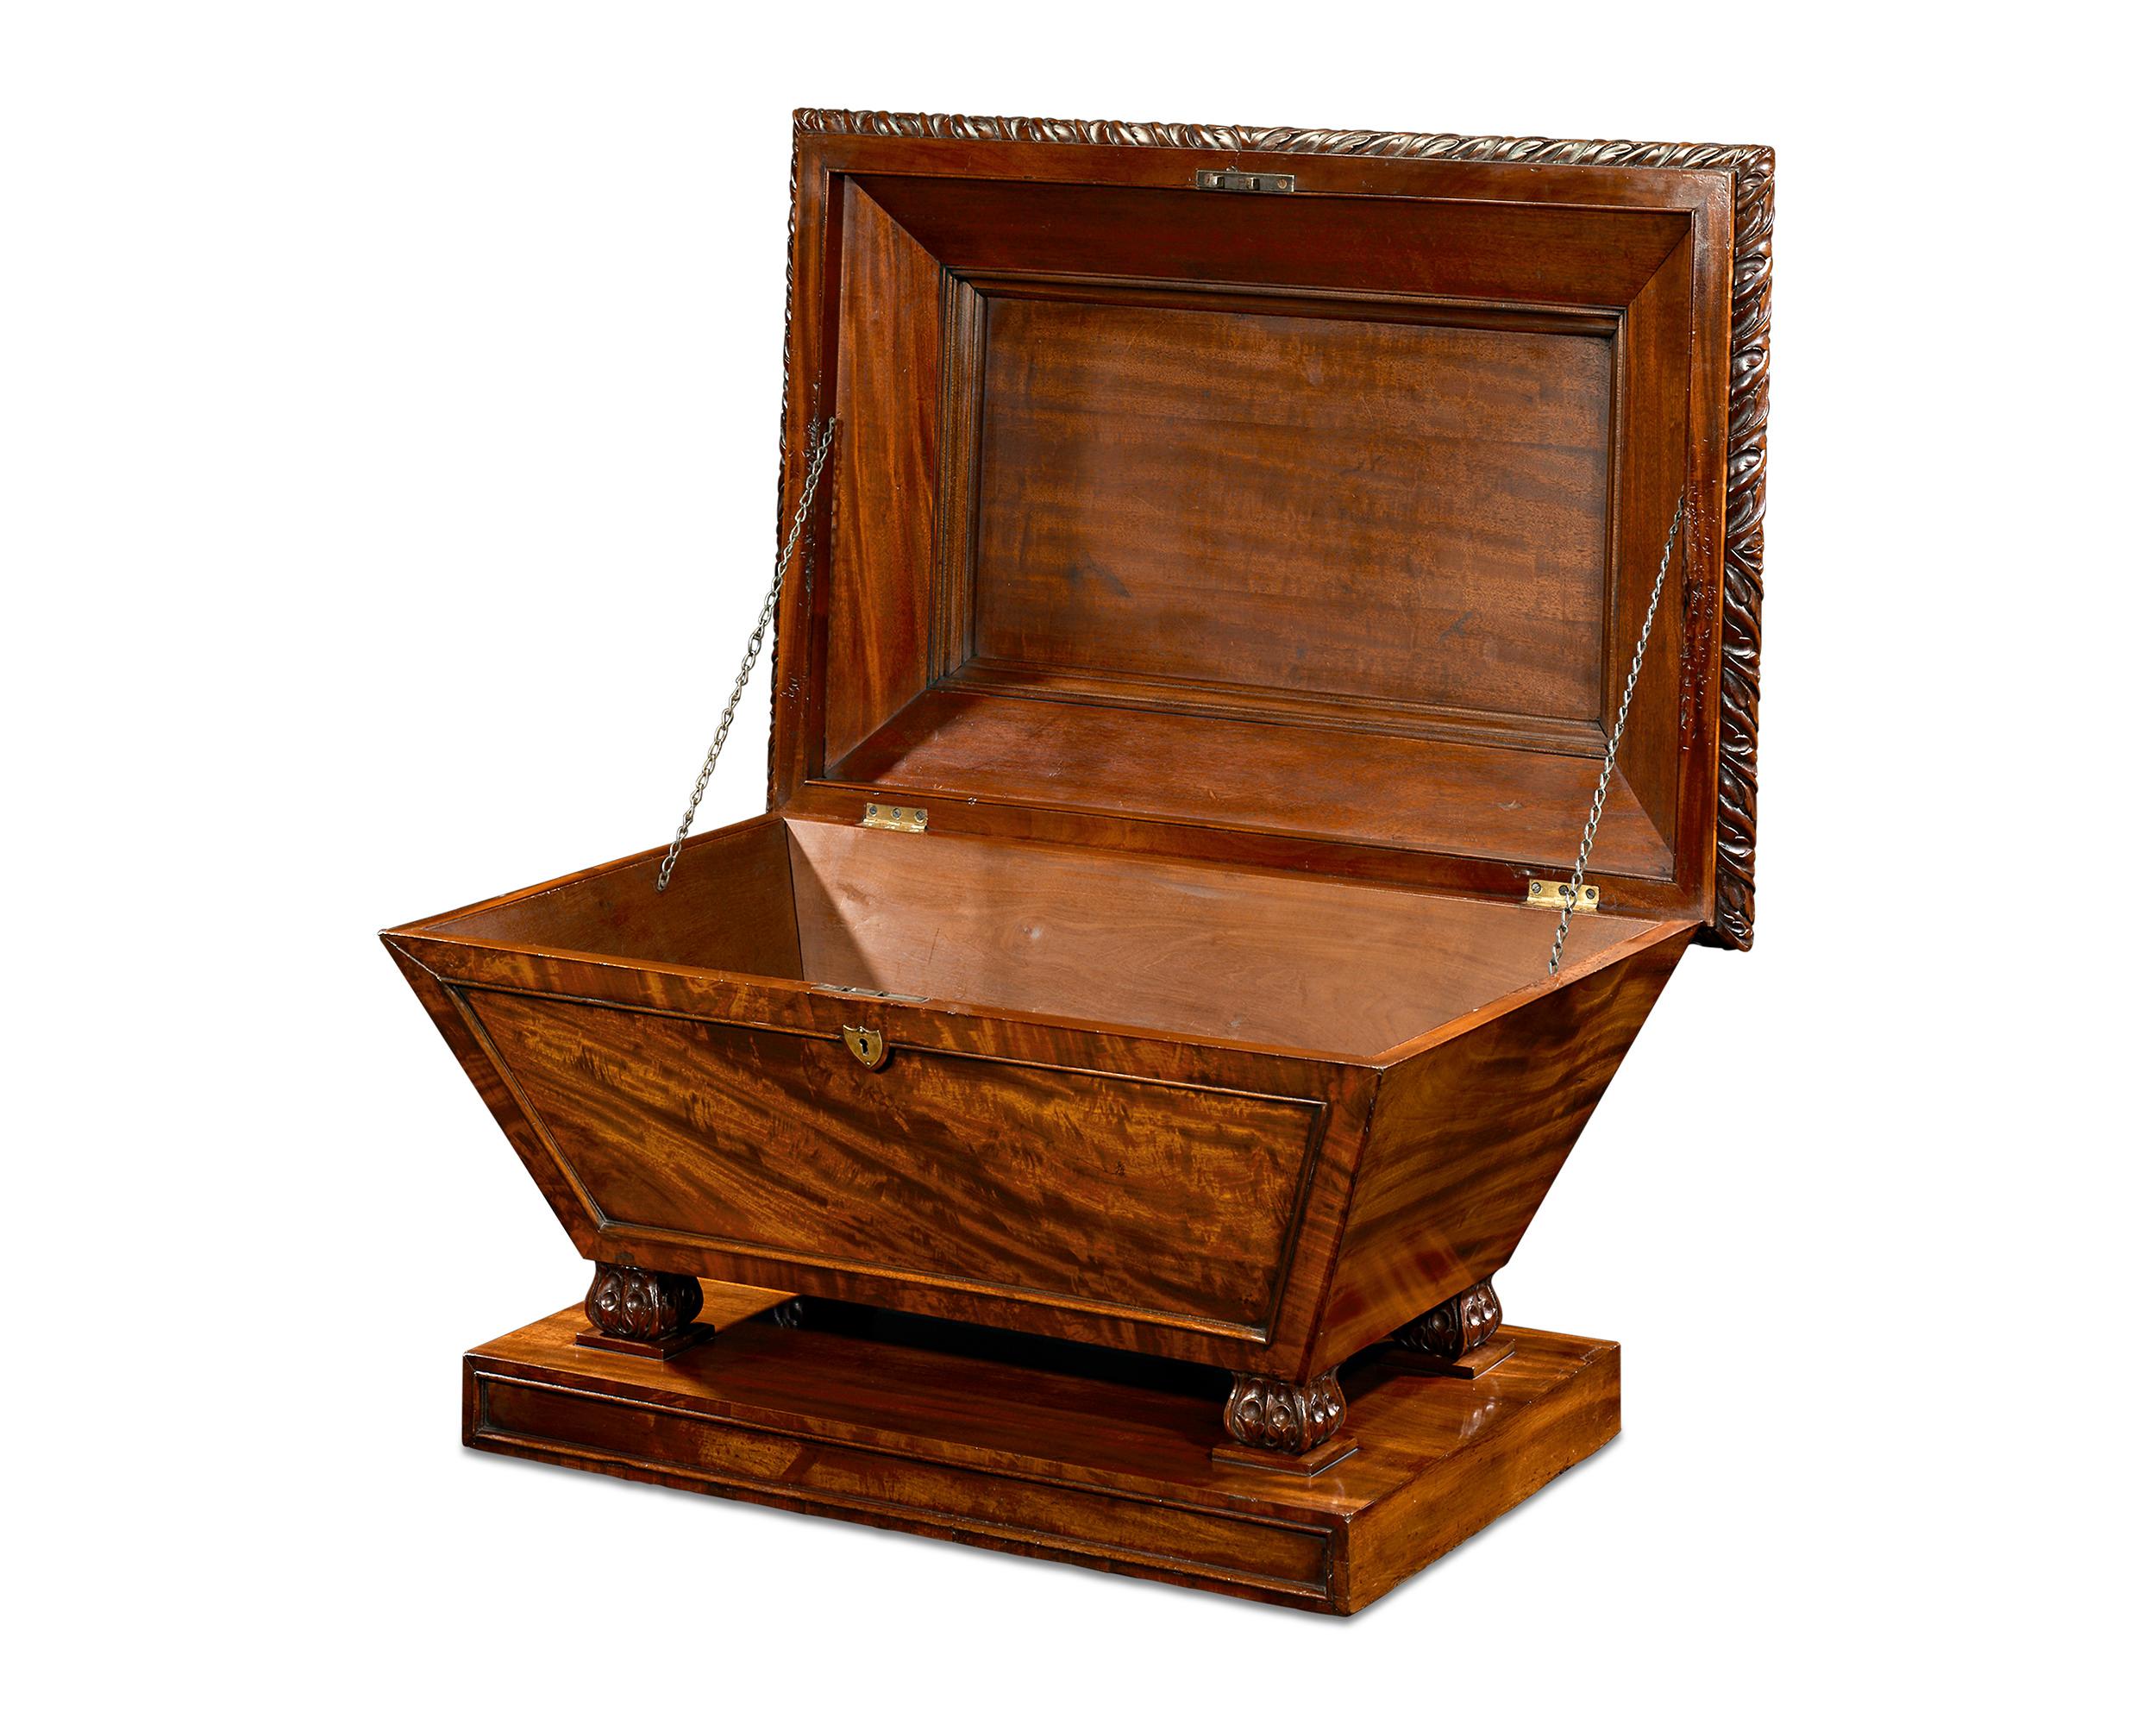 An exceptional and rare English wine cellarette is an exemplary specimen of Regency furniture. The cellarette is formed in a streamlined sarcophagus shape from beautifully grained mahogany. Neoclassical gadroon and acanthus carvings echo the